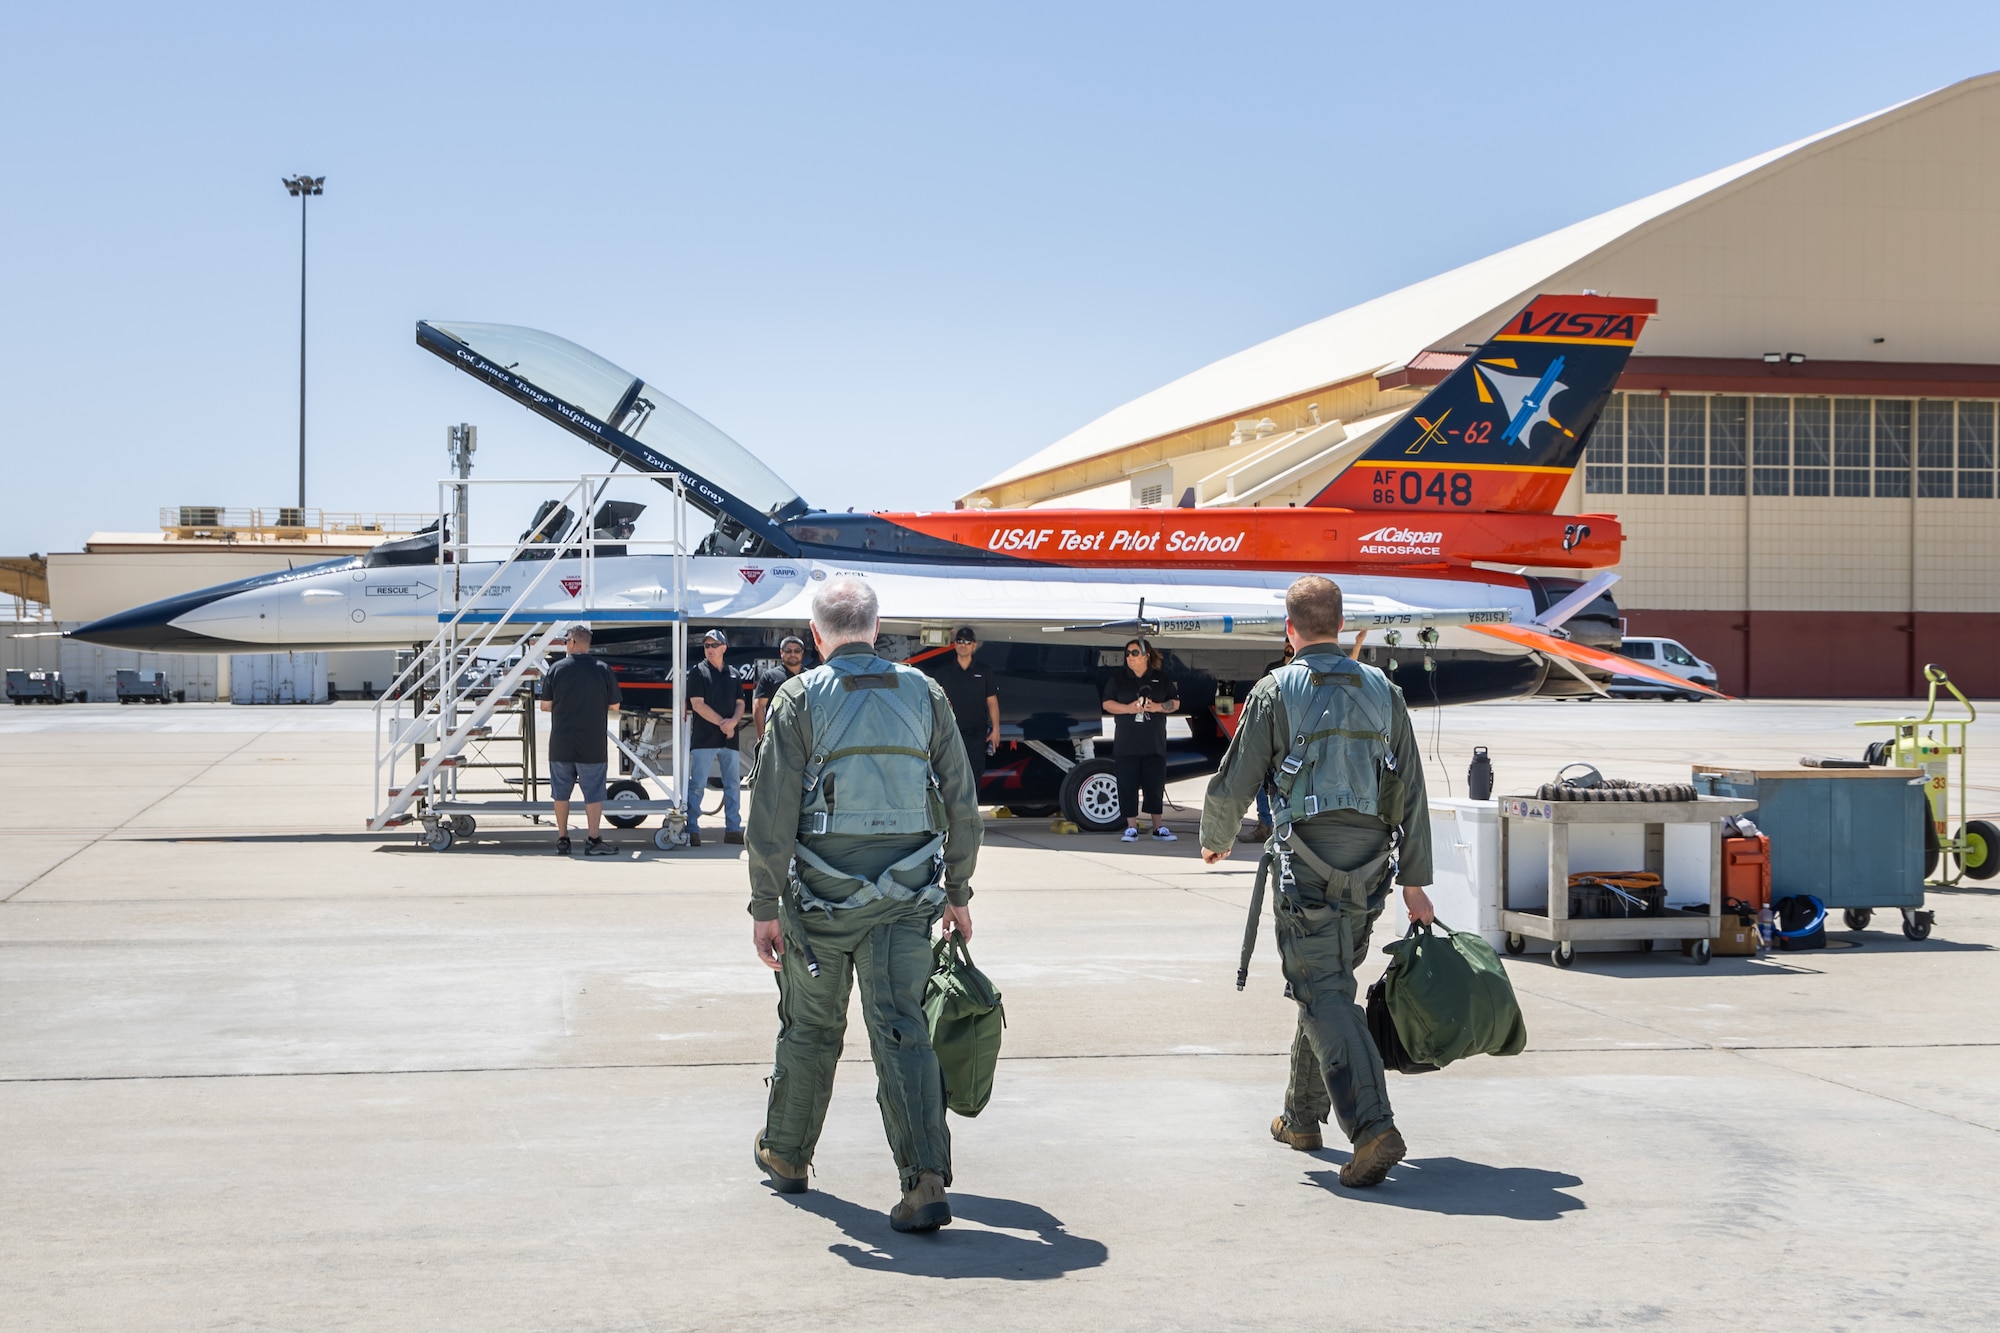 Secretary of the Air Force Frank Kendall prepares to fly in the X-62 VISTA during a visit to Edwards Air Force Base, California, May 2. (Air Force photo by James West)